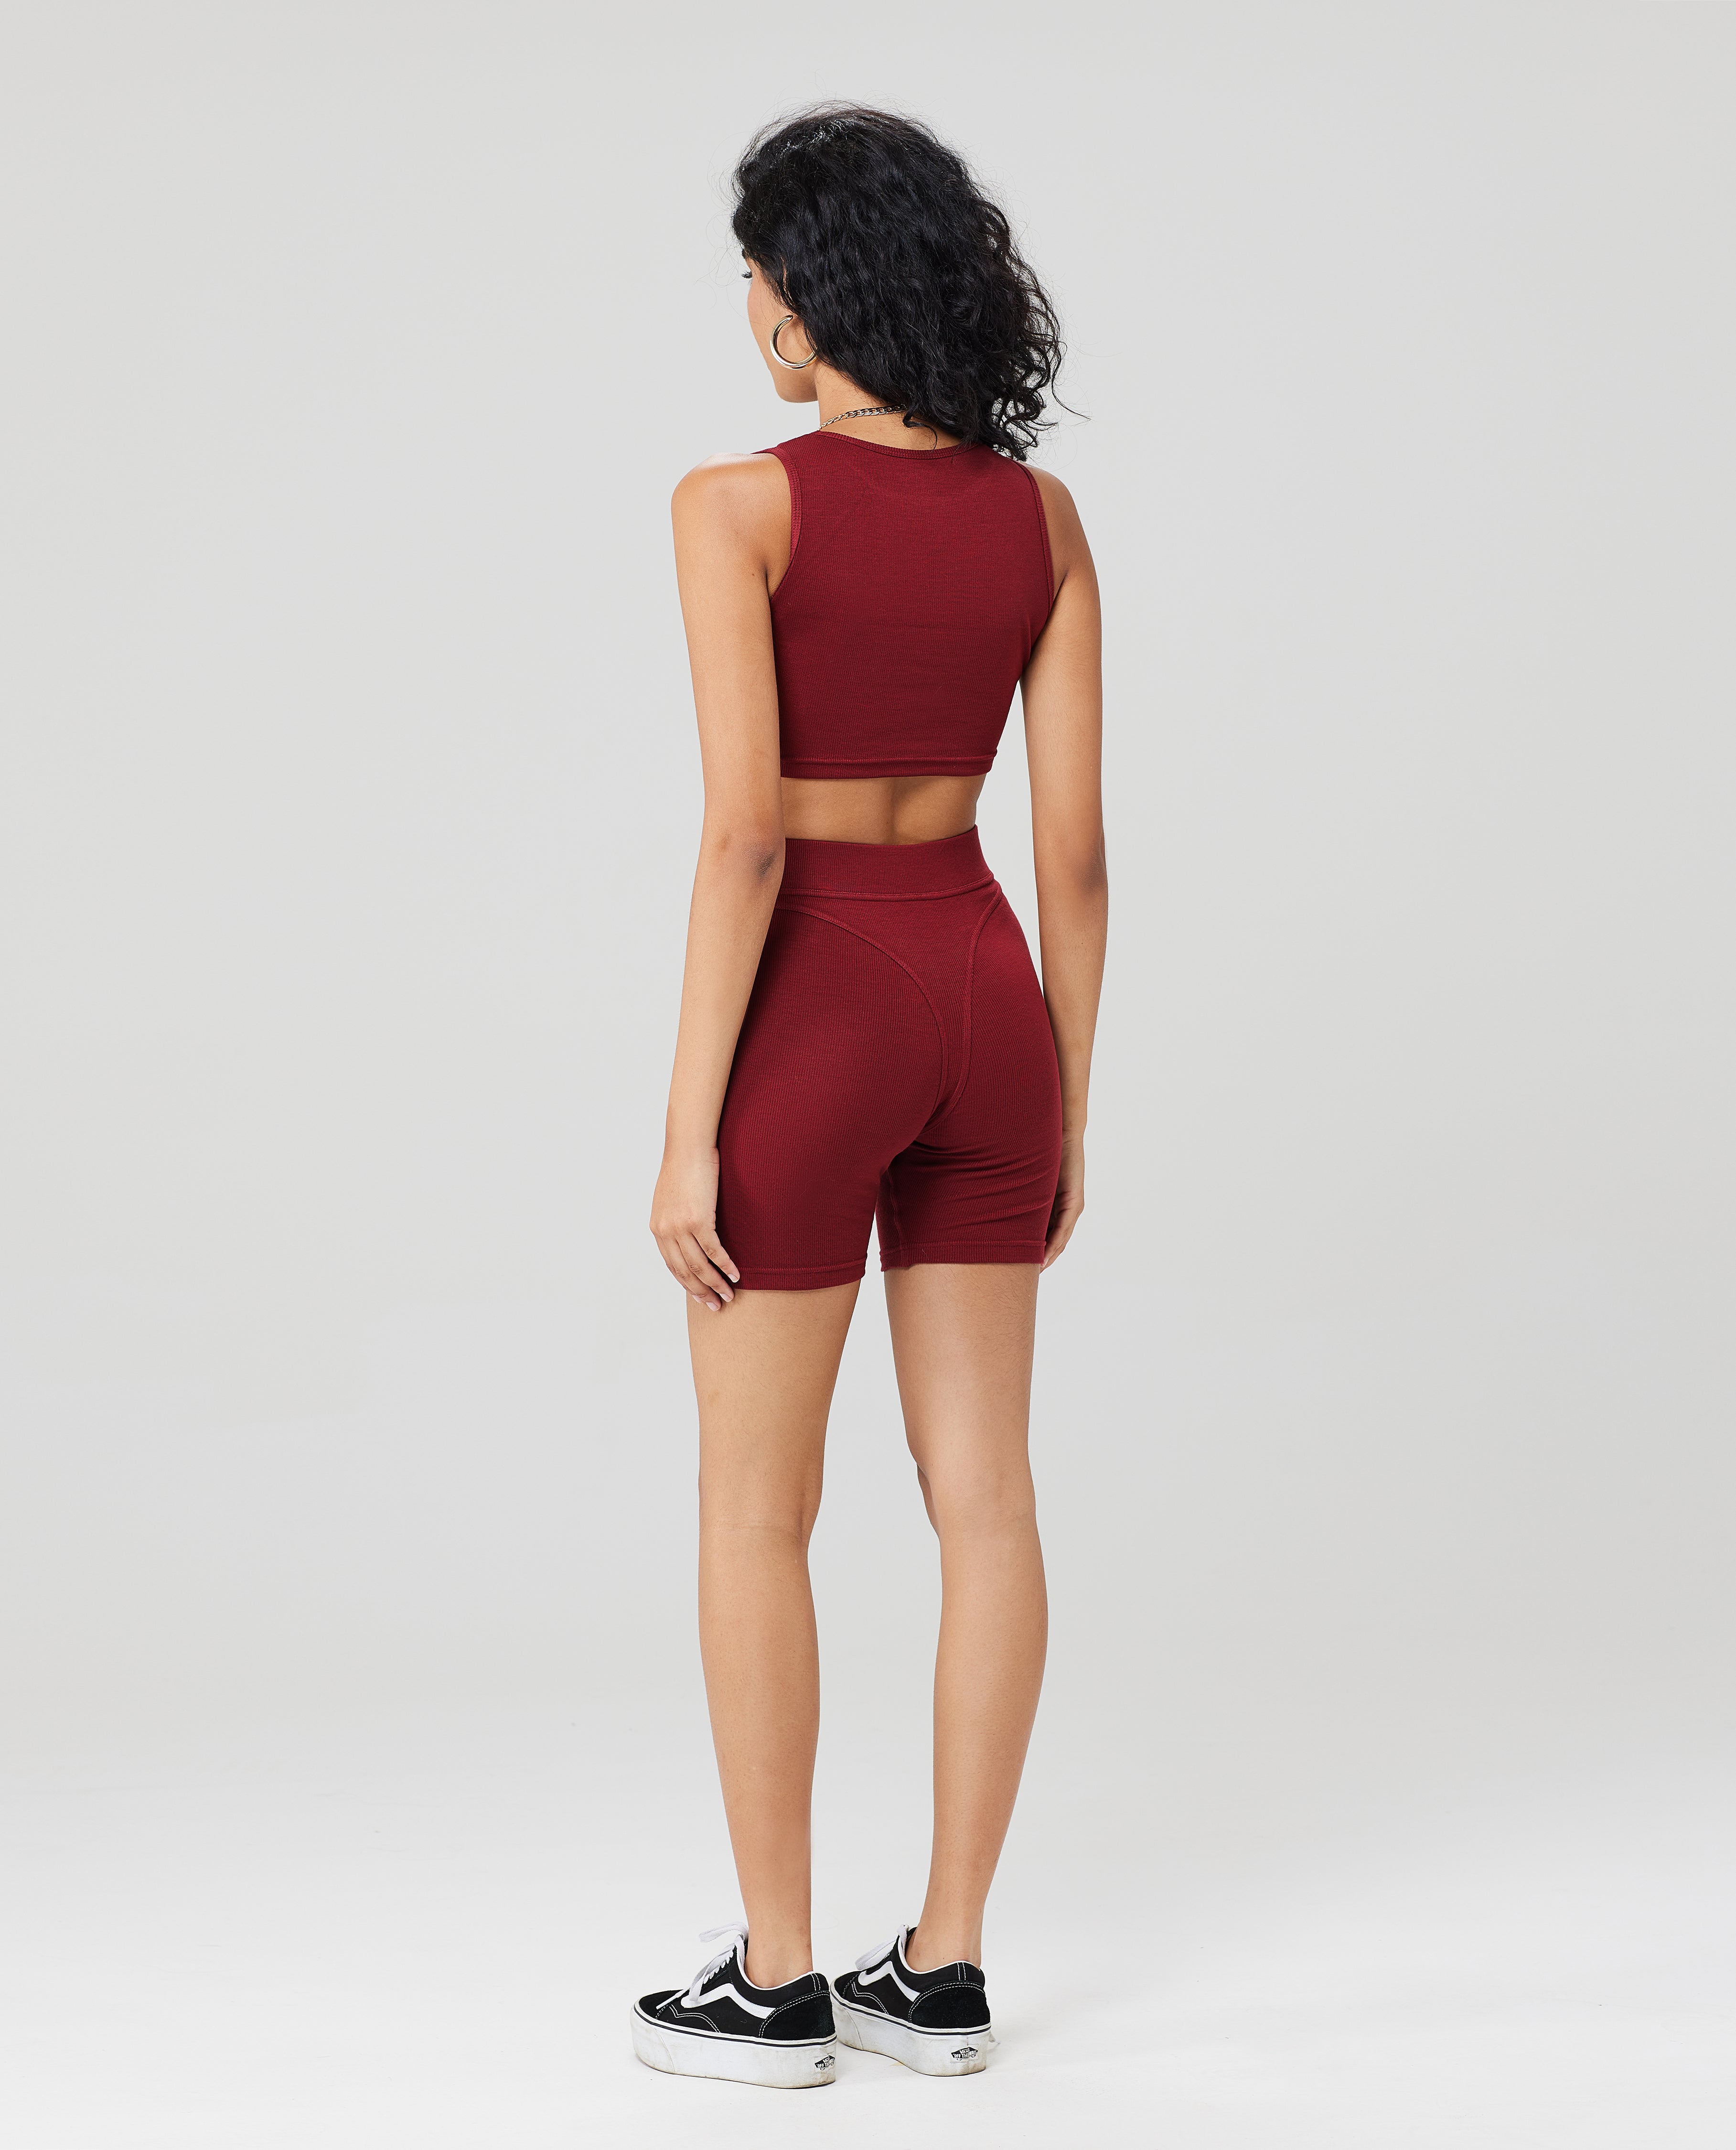 TLF Activewear Set Red Size XS - $40 (63% Off Retail) - From Erika